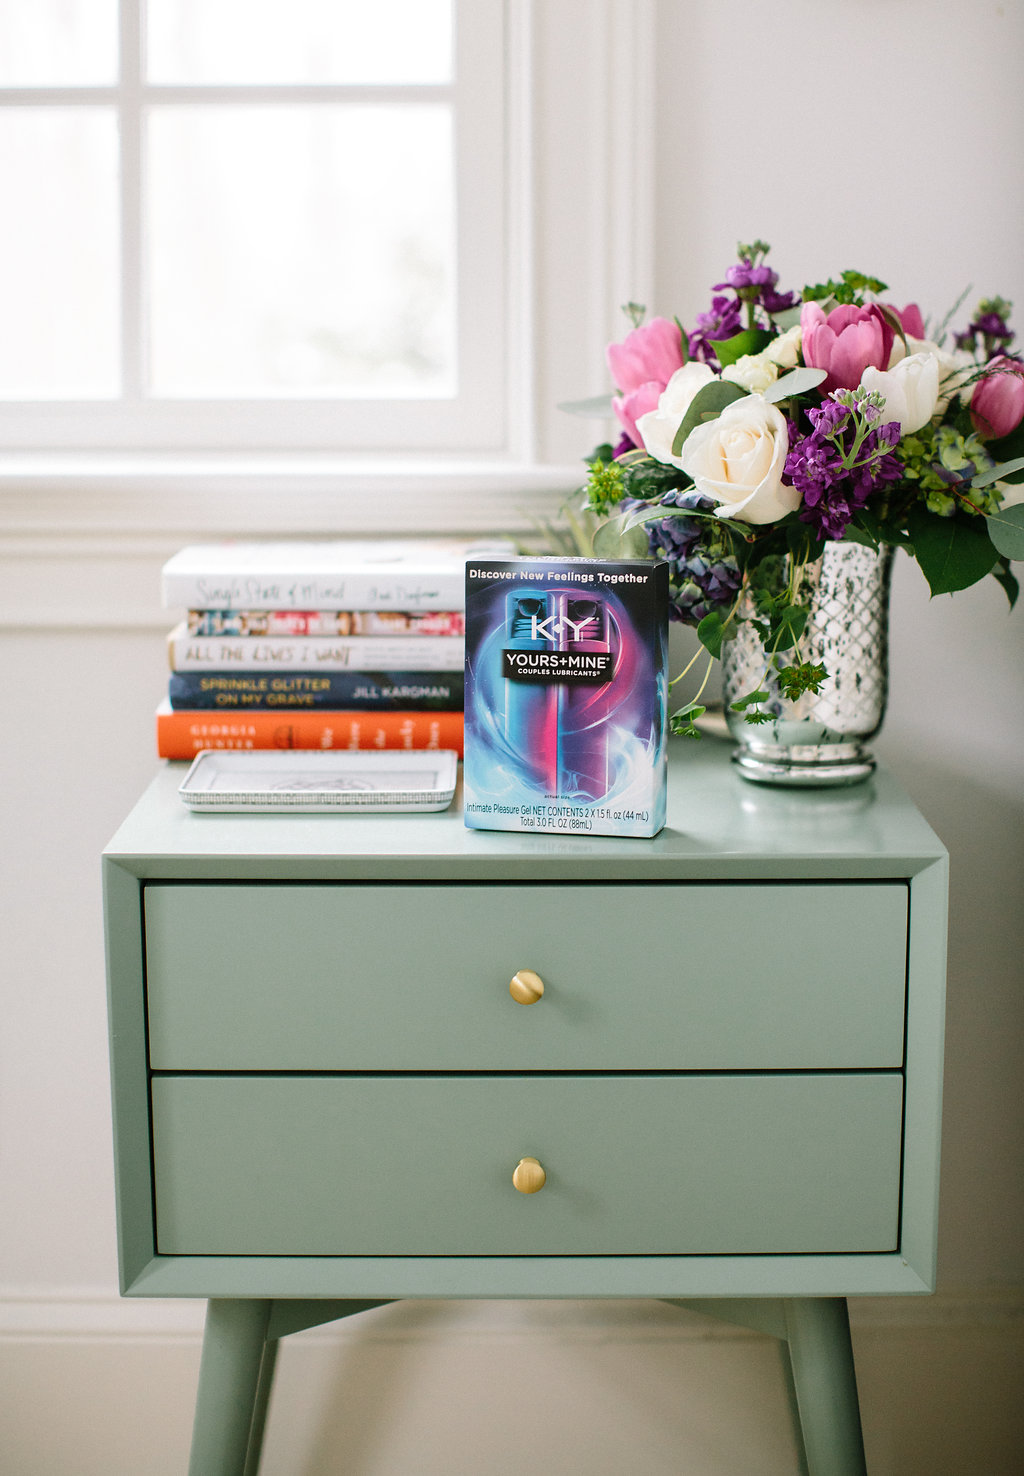 A box of K-Y lubricant sits on the bedside table along with a bouquet of flowers and a stack of books in the Master Bedroom of Eva Amurri Martino's Connecticut home